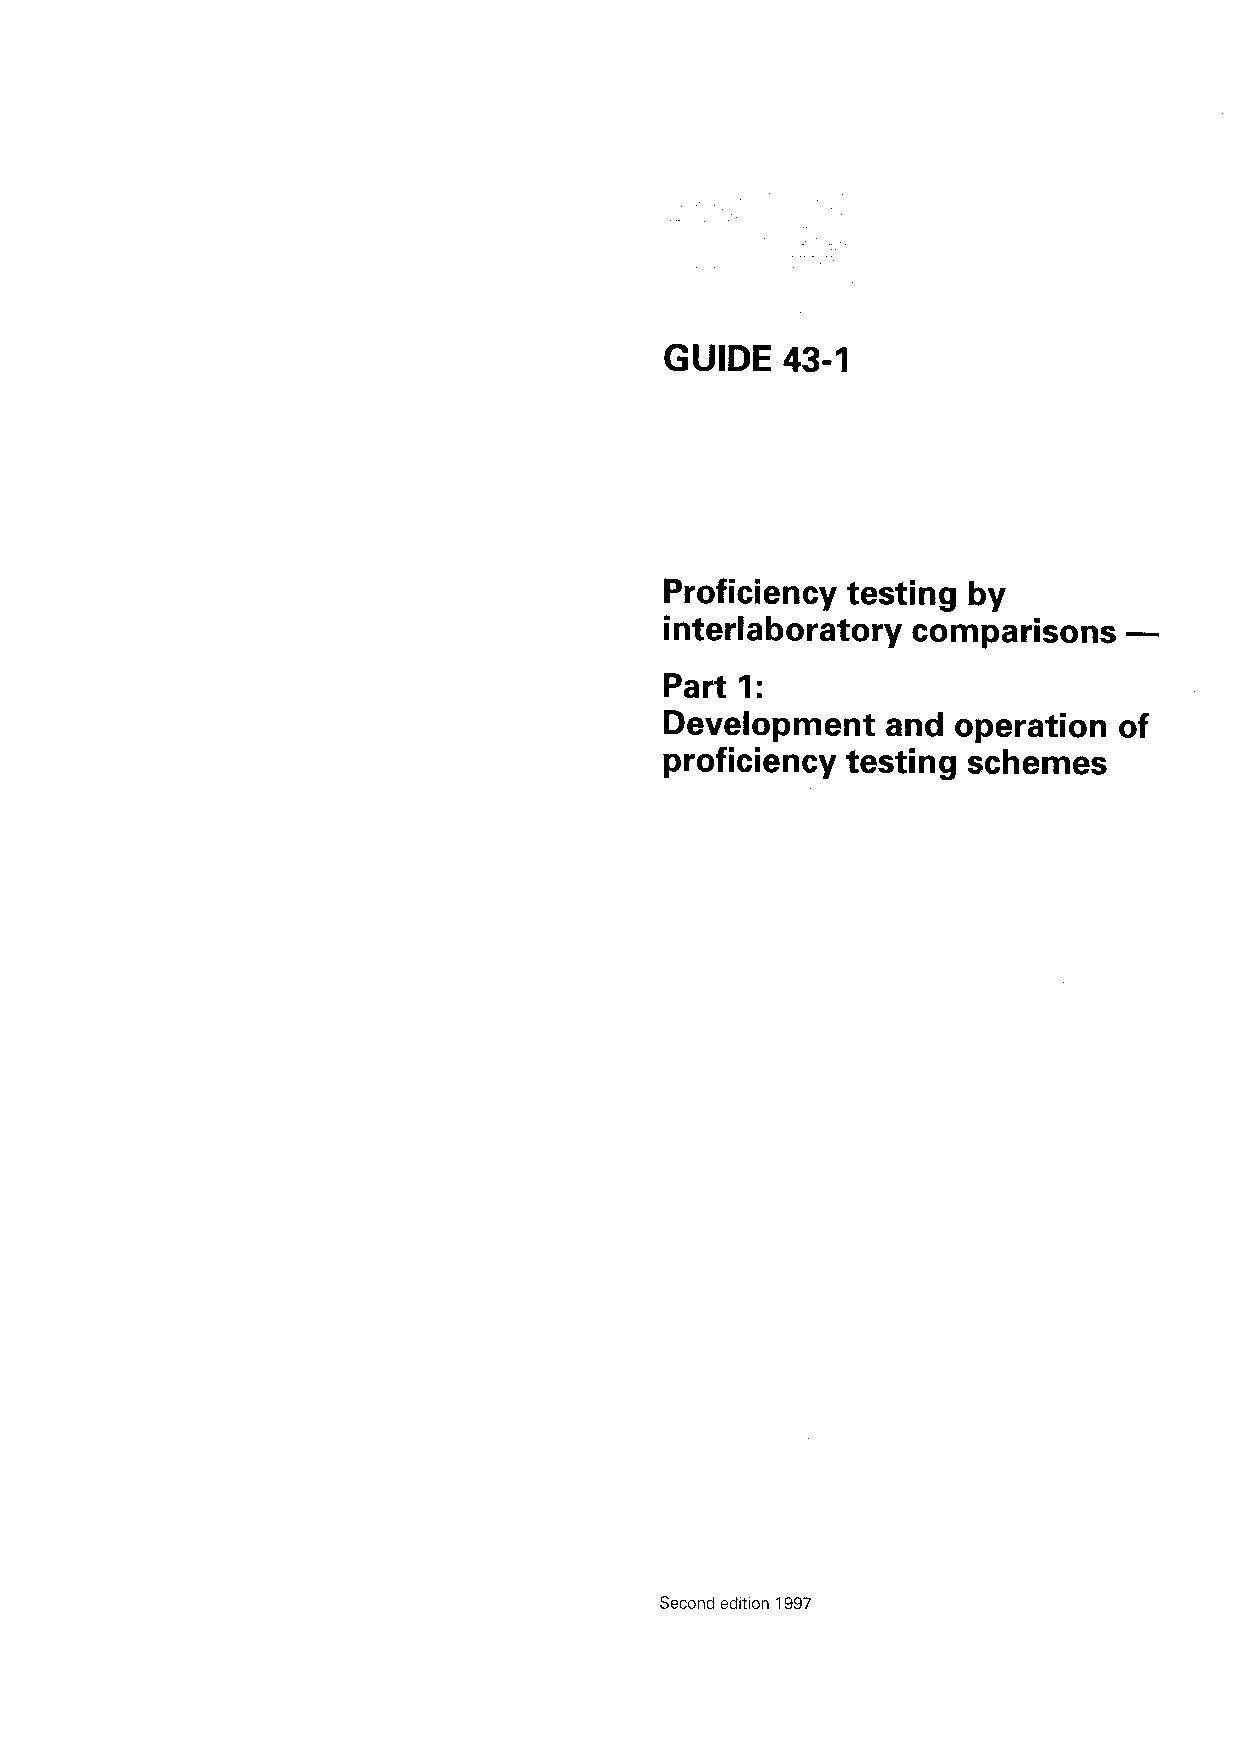 ISO/IEC Guide 43-1:1997